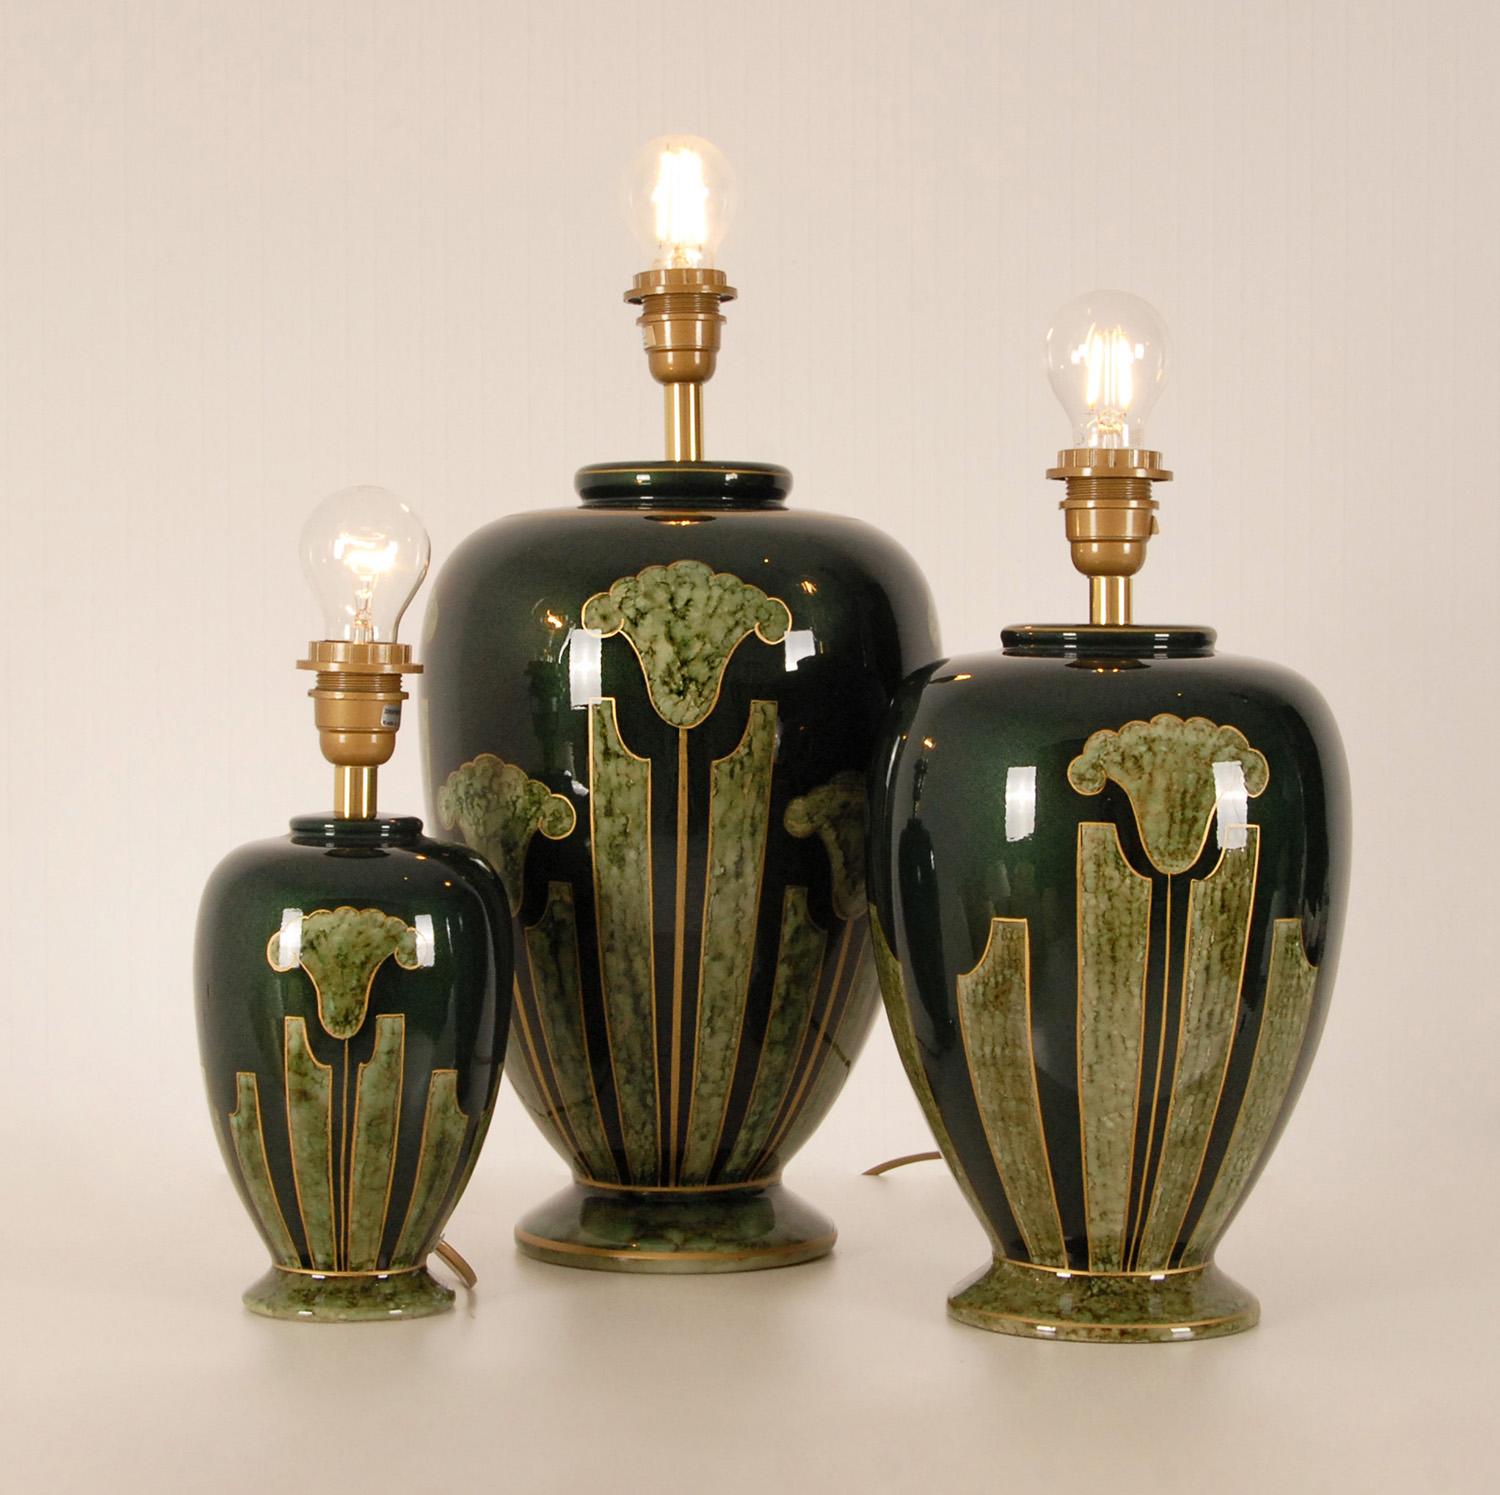 Vintage French Ceramic Green and Gold Table Lamps Marble Metallic, Set of 3 For Sale 5